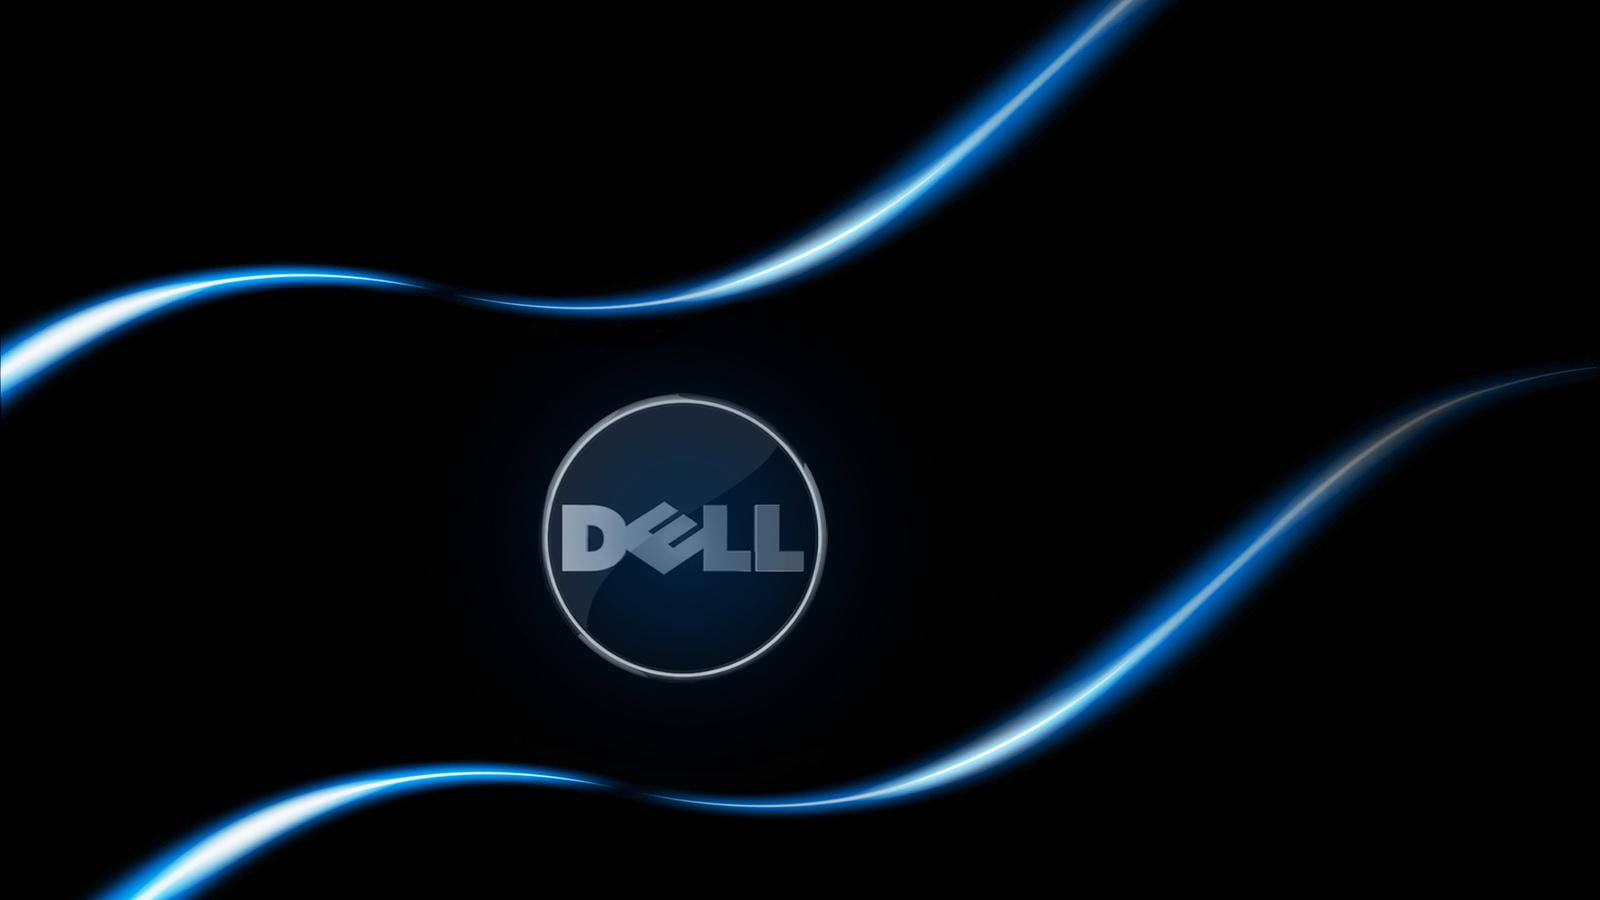 Blue Rays With Dell Hd Logo Background